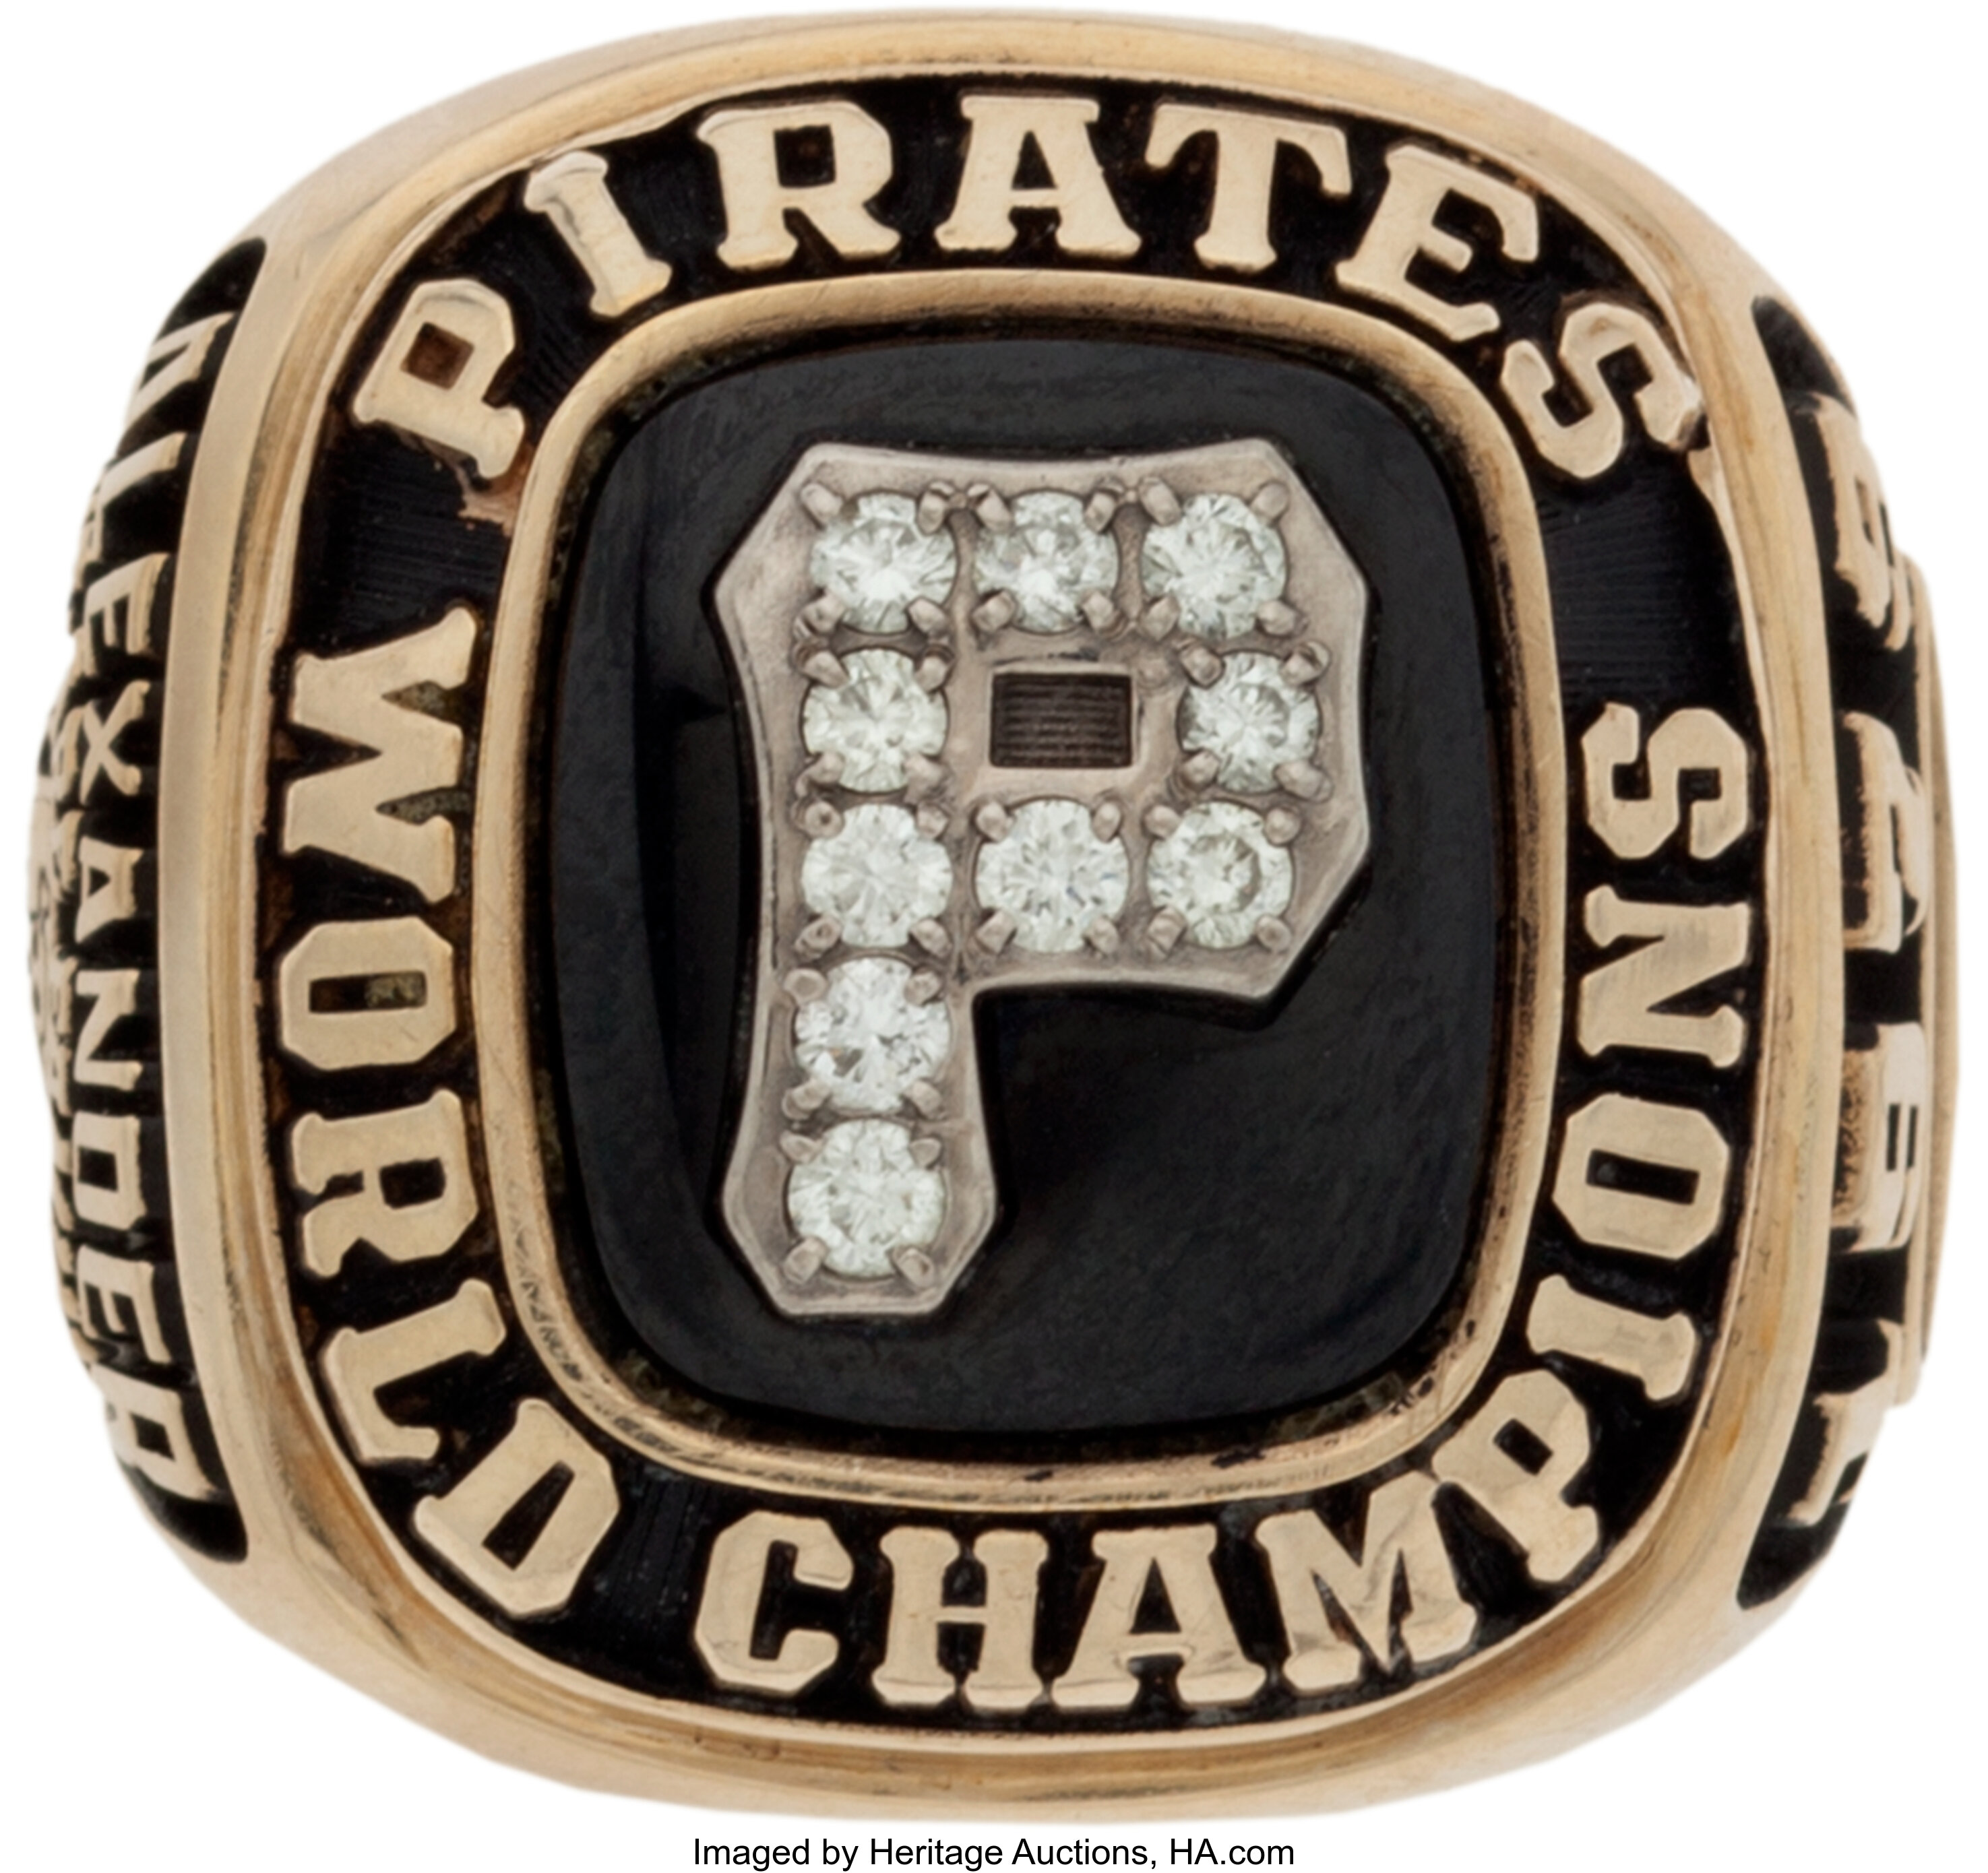 When the Bucs Won It All: The 1979 World Champion Pittsburgh Pirates [Book]